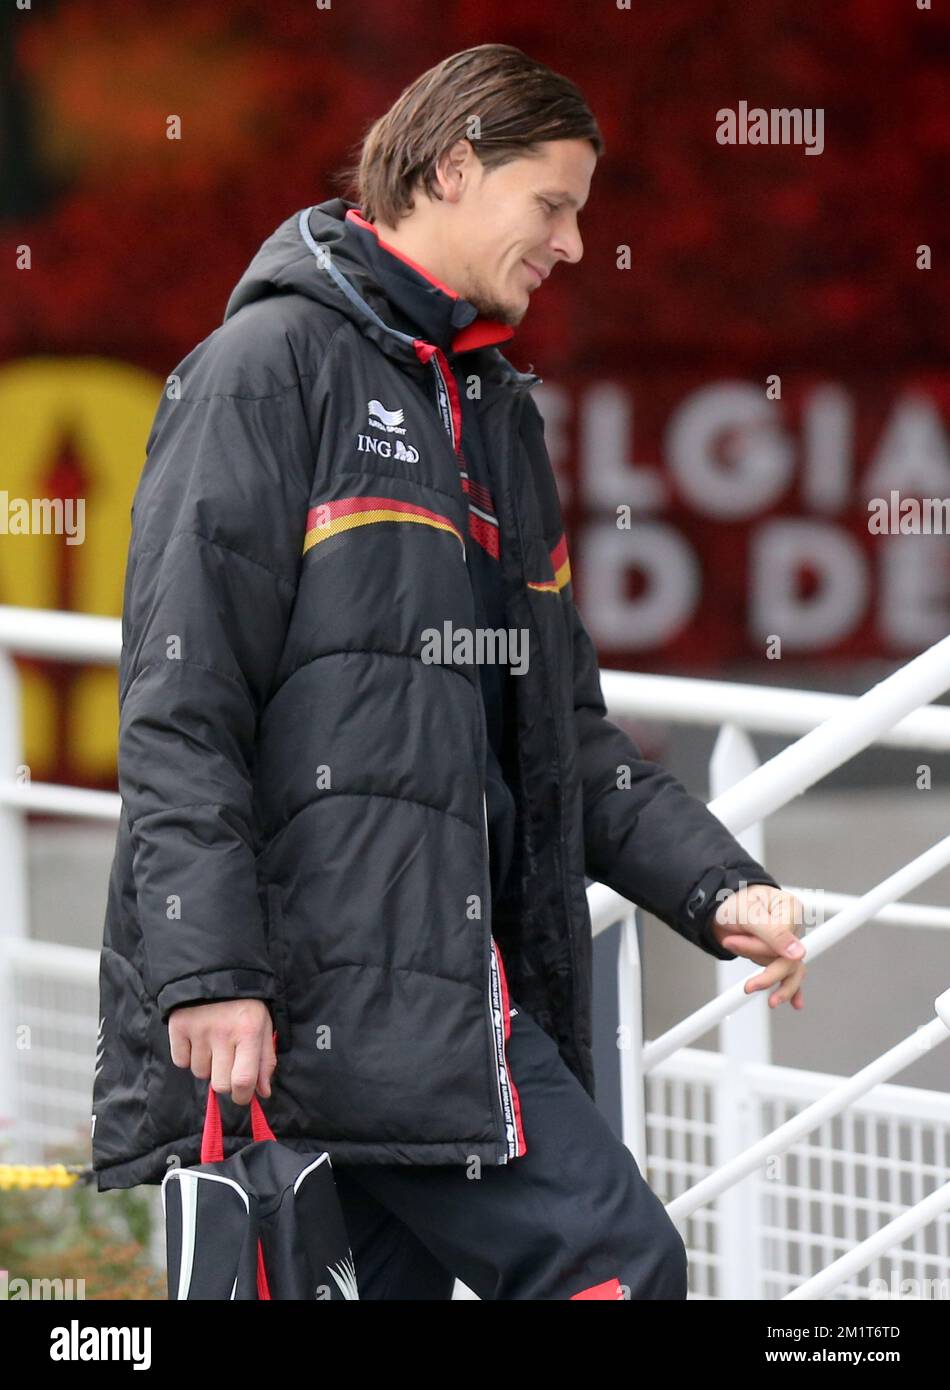 20131115 - BRUSSELS, BELGIUM: Belgium's Daniel Van Buyten arrives for a training session of Belgian national soccer team Red Devils in Brussels, on Friday 15 November 2013. Yesterday they played Colombia and they will play Japan on November 19th in friendly games. BELGA PHOTO VIRGINIE LEFOUR Stock Photo